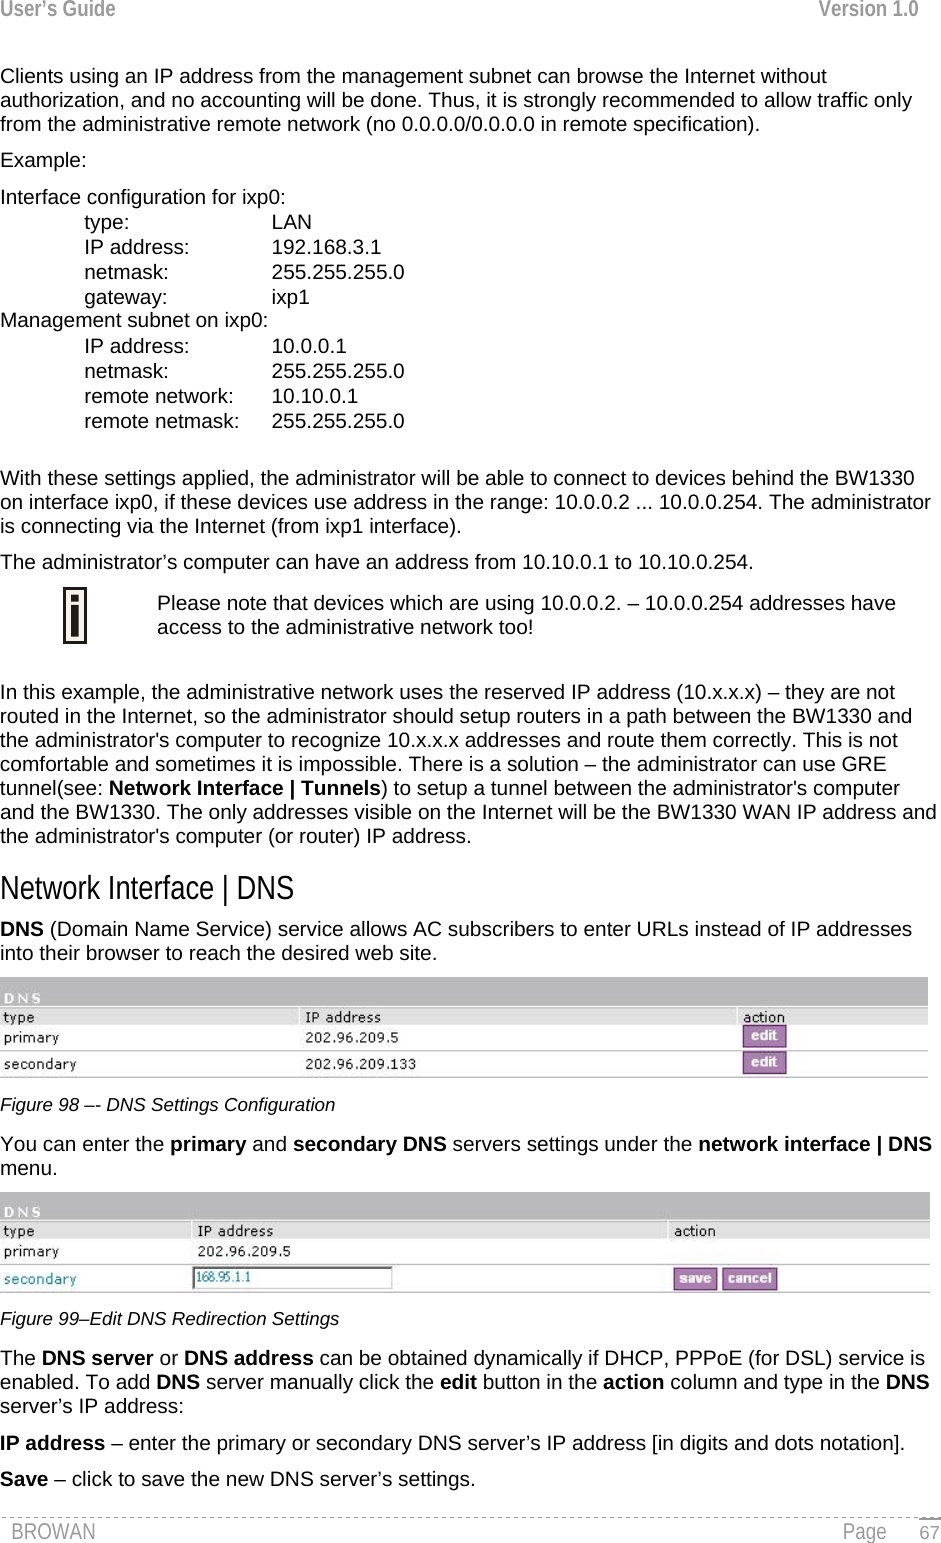 User’s Guide  Version 1.0  Clients using an IP address from the management subnet can browse the Internet without authorization, and no accounting will be done. Thus, it is strongly recommended to allow traffic only from the administrative remote network (no 0.0.0.0/0.0.0.0 in remote specification).  Example: Interface configuration for ixp0: type:   LAN IP address:   192.168.3.1 netmask:   255.255.255.0 gateway:   ixp1 Management subnet on ixp0: IP address:   10.0.0.1 netmask:   255.255.255.0 remote network:   10.10.0.1 remote netmask:   255.255.255.0  With these settings applied, the administrator will be able to connect to devices behind the BW1330 on interface ixp0, if these devices use address in the range: 10.0.0.2 ... 10.0.0.254. The administrator is connecting via the Internet (from ixp1 interface).  The administrator’s computer can have an address from 10.10.0.1 to 10.10.0.254.   Please note that devices which are using 10.0.0.2. – 10.0.0.254 addresses have access to the administrative network too!  In this example, the administrative network uses the reserved IP address (10.x.x.x) – they are not routed in the Internet, so the administrator should setup routers in a path between the BW1330 and the administrator&apos;s computer to recognize 10.x.x.x addresses and route them correctly. This is not comfortable and sometimes it is impossible. There is a solution – the administrator can use GRE tunnel(see: Network Interface | Tunnels) to setup a tunnel between the administrator&apos;s computer and the BW1330. The only addresses visible on the Internet will be the BW1330 WAN IP address and the administrator&apos;s computer (or router) IP address. Network Interface | DNS  DNS (Domain Name Service) service allows AC subscribers to enter URLs instead of IP addresses into their browser to reach the desired web site.   Figure 98 –- DNS Settings Configuration You can enter the primary and secondary DNS servers settings under the network interface | DNS menu.   Figure 99–Edit DNS Redirection Settings The DNS server or DNS address can be obtained dynamically if DHCP, PPPoE (for DSL) service is enabled. To add DNS server manually click the edit button in the action column and type in the DNS server’s IP address: IP address – enter the primary or secondary DNS server’s IP address [in digits and dots notation]. Save – click to save the new DNS server’s settings. BROWAN                                                                                                                                               Page   67